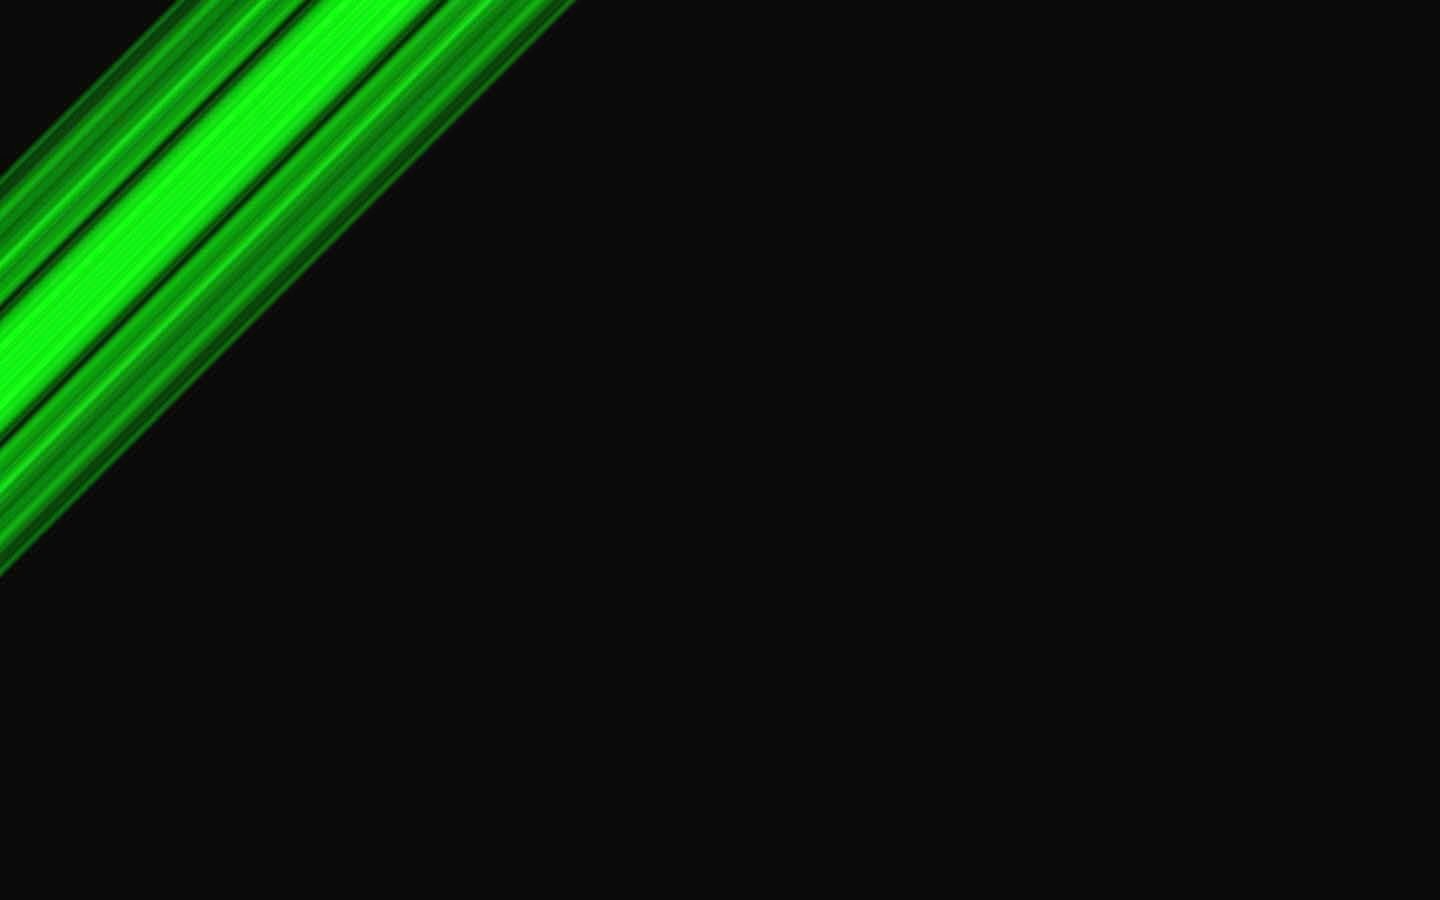 Green And Black Backgrounds Related Keywords amp Suggestions